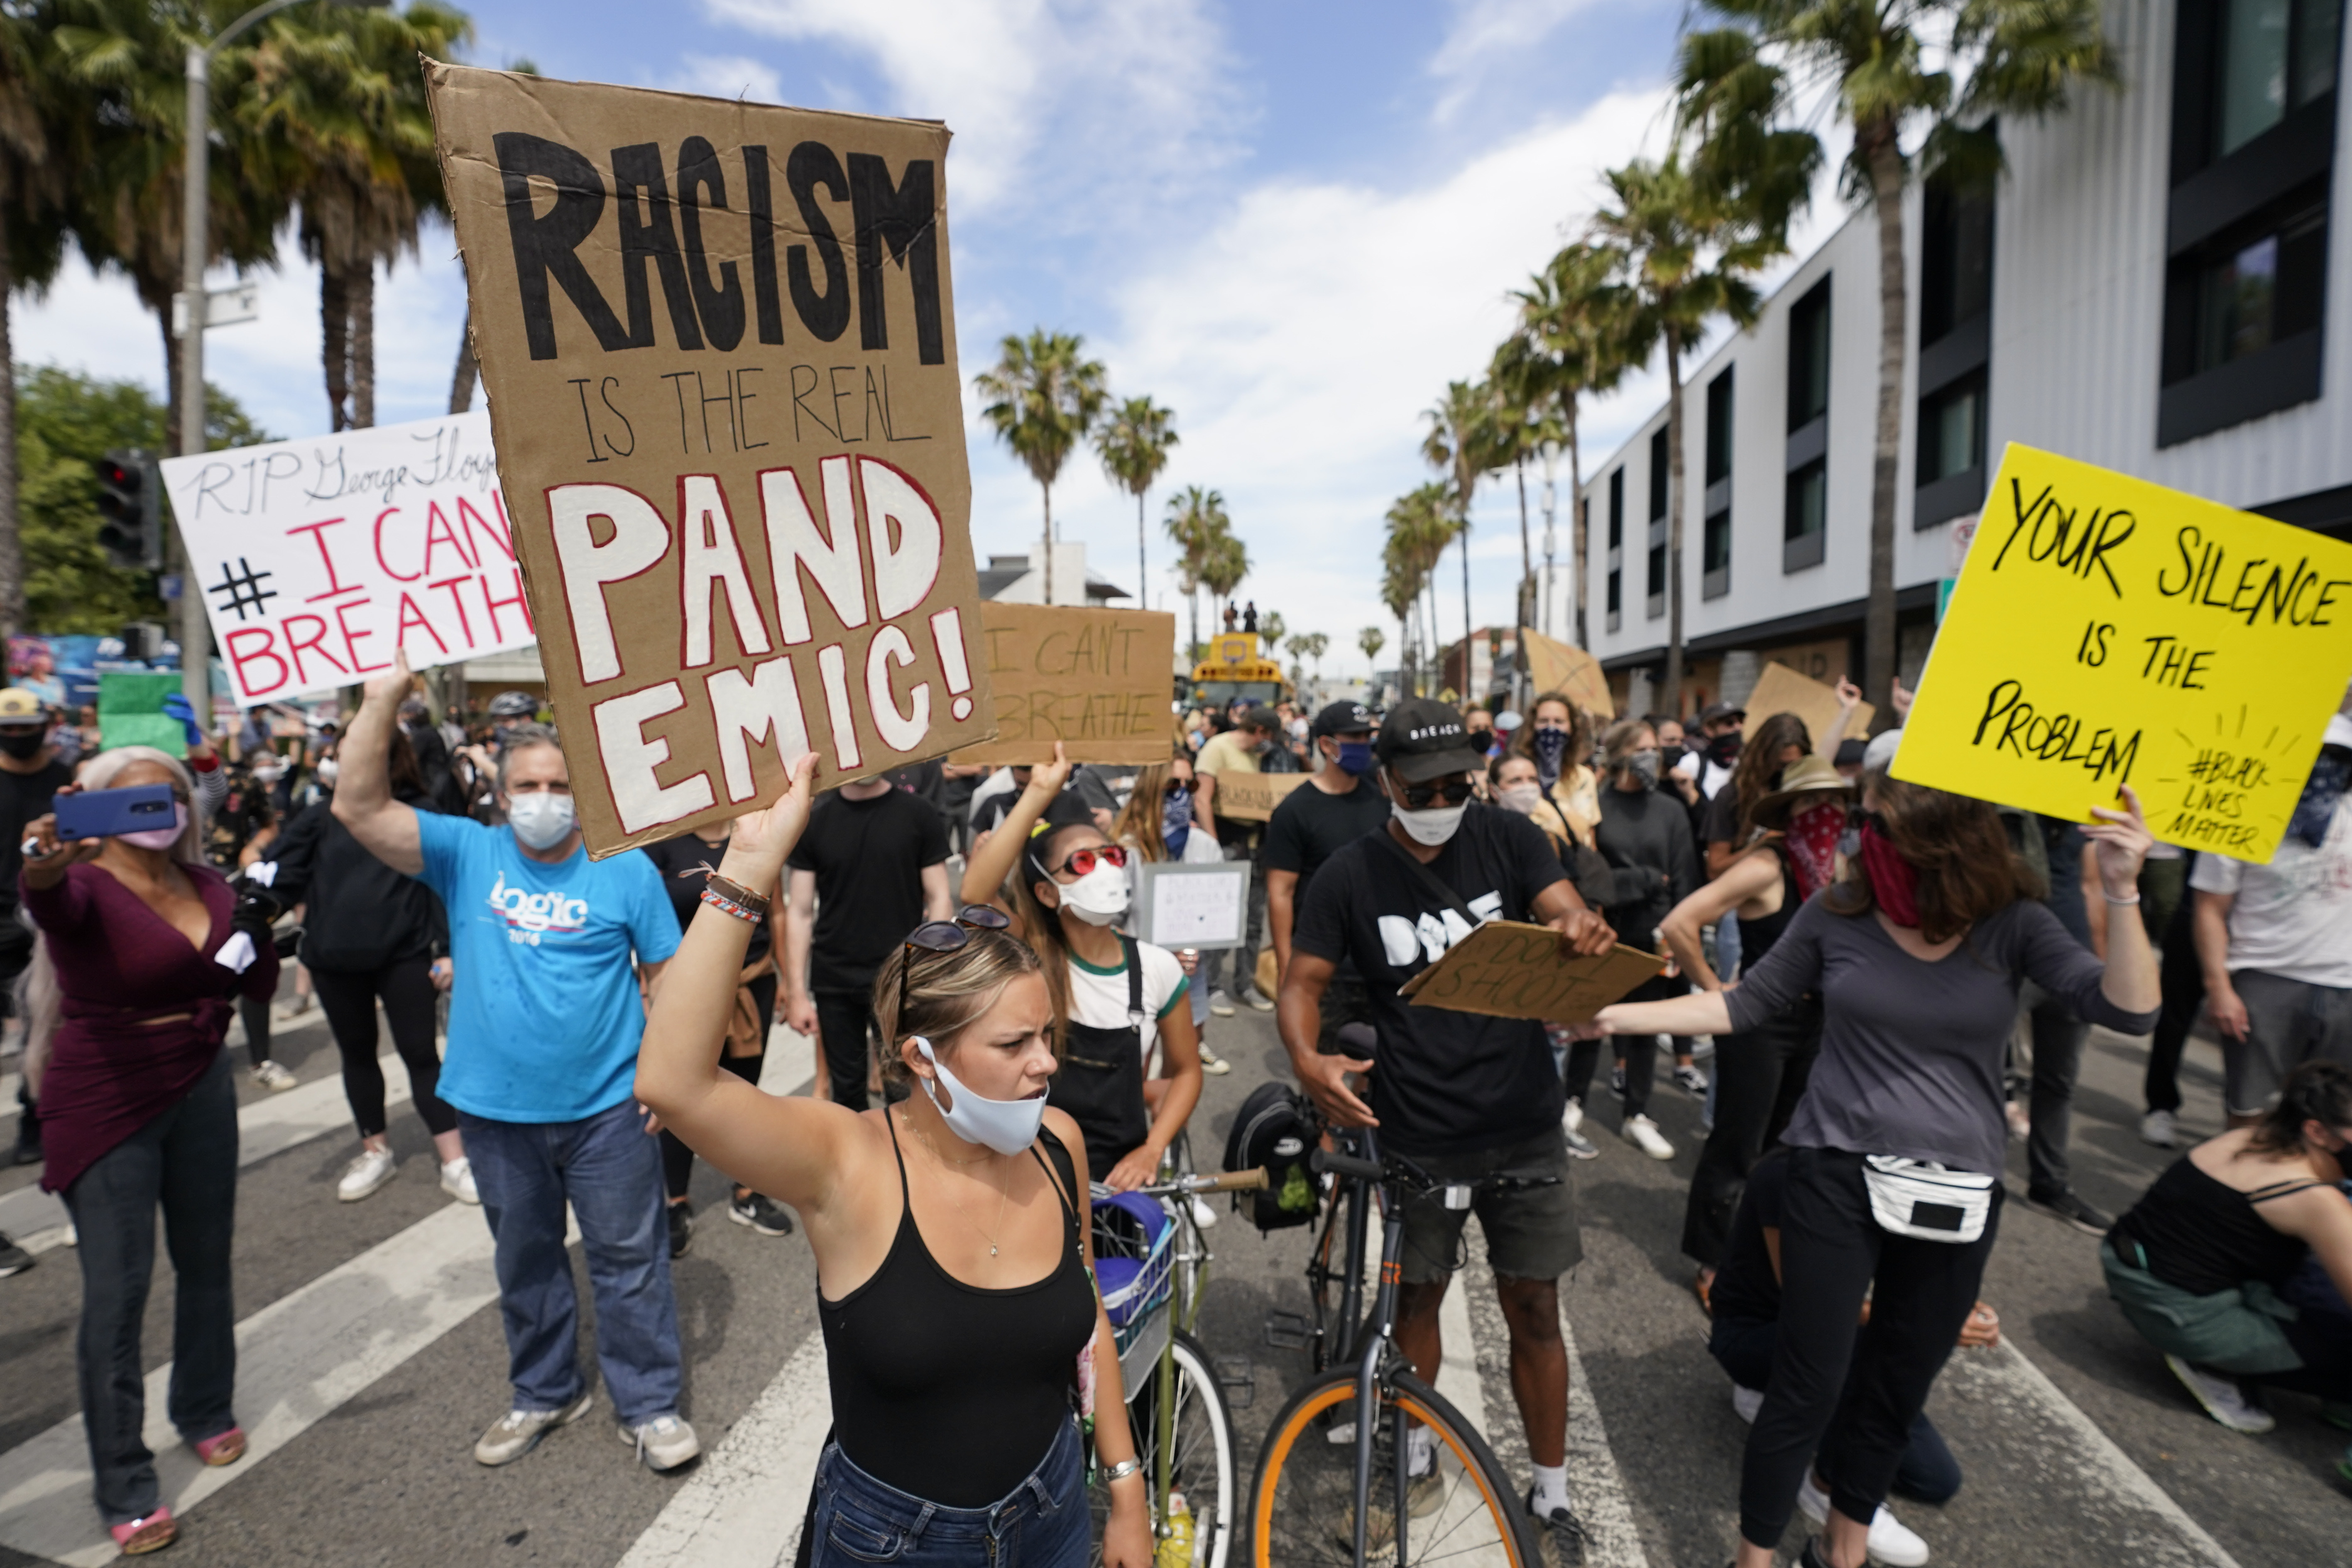 Demonstrators hold up signs on June 2 in Venice, a beachfront neighborhood in Los Angeles, during a protest over the death of George Floyd.